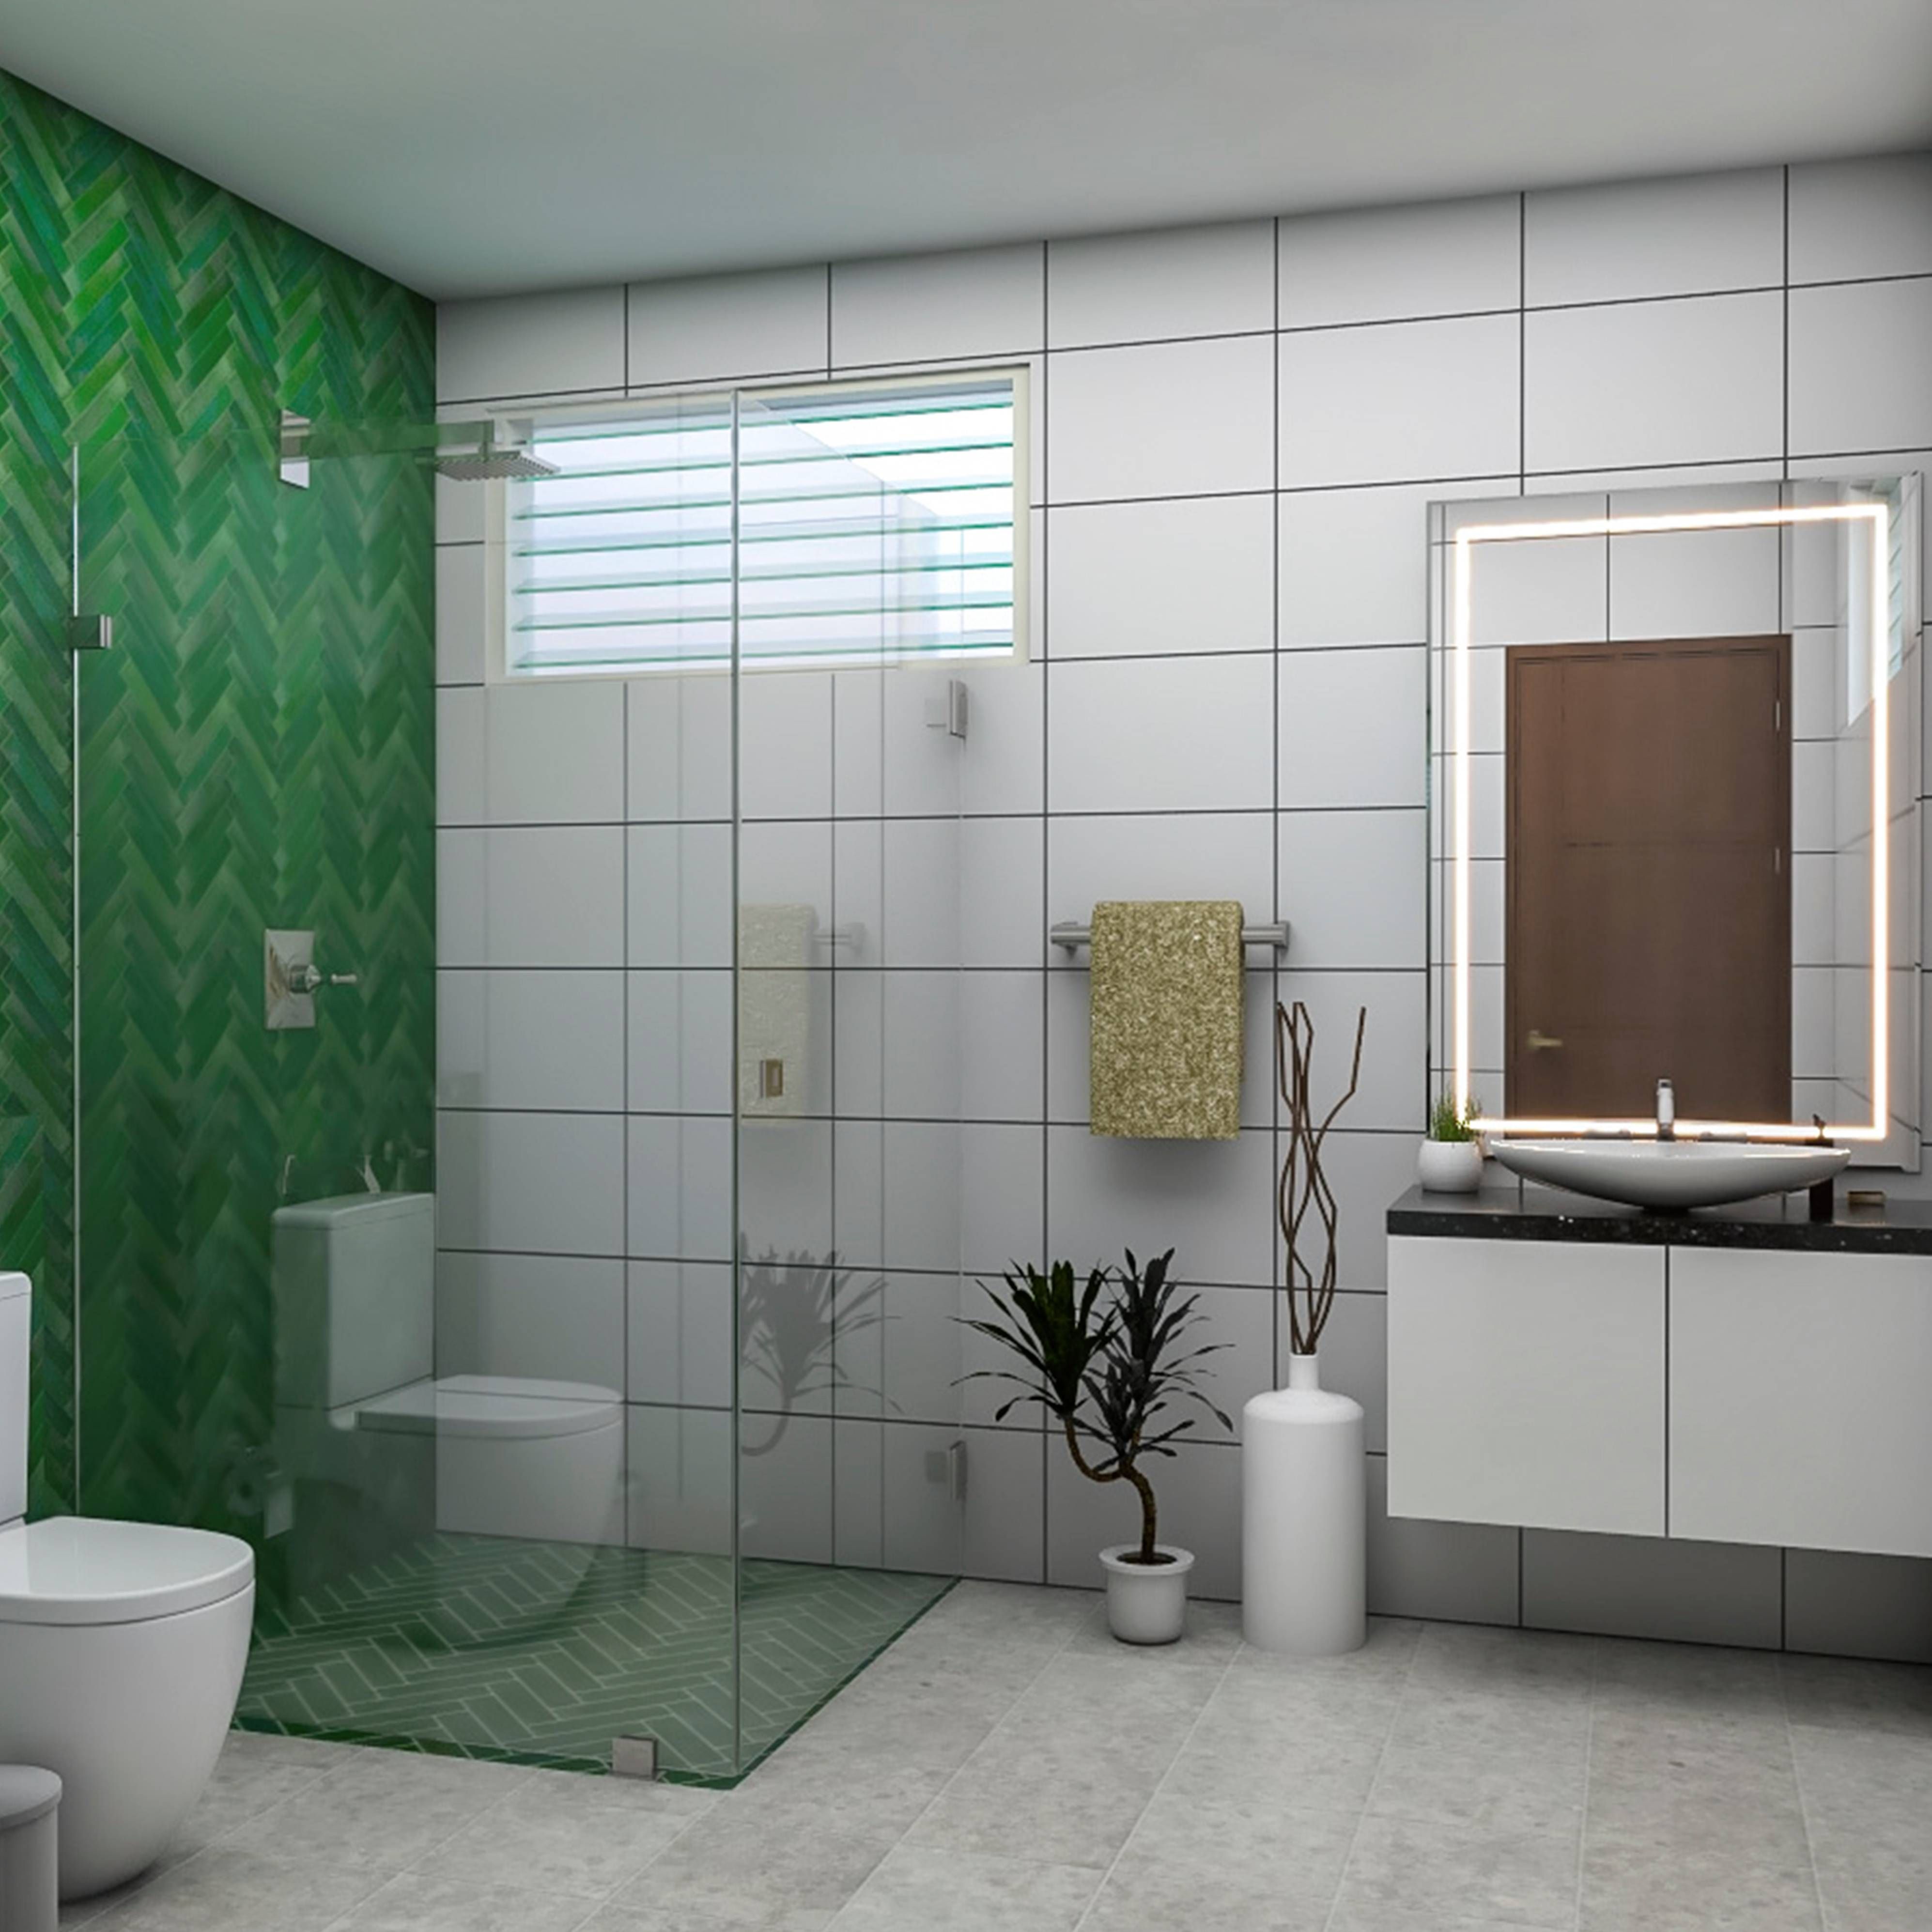 Green And White Bathroom Design With Glass Cubicle